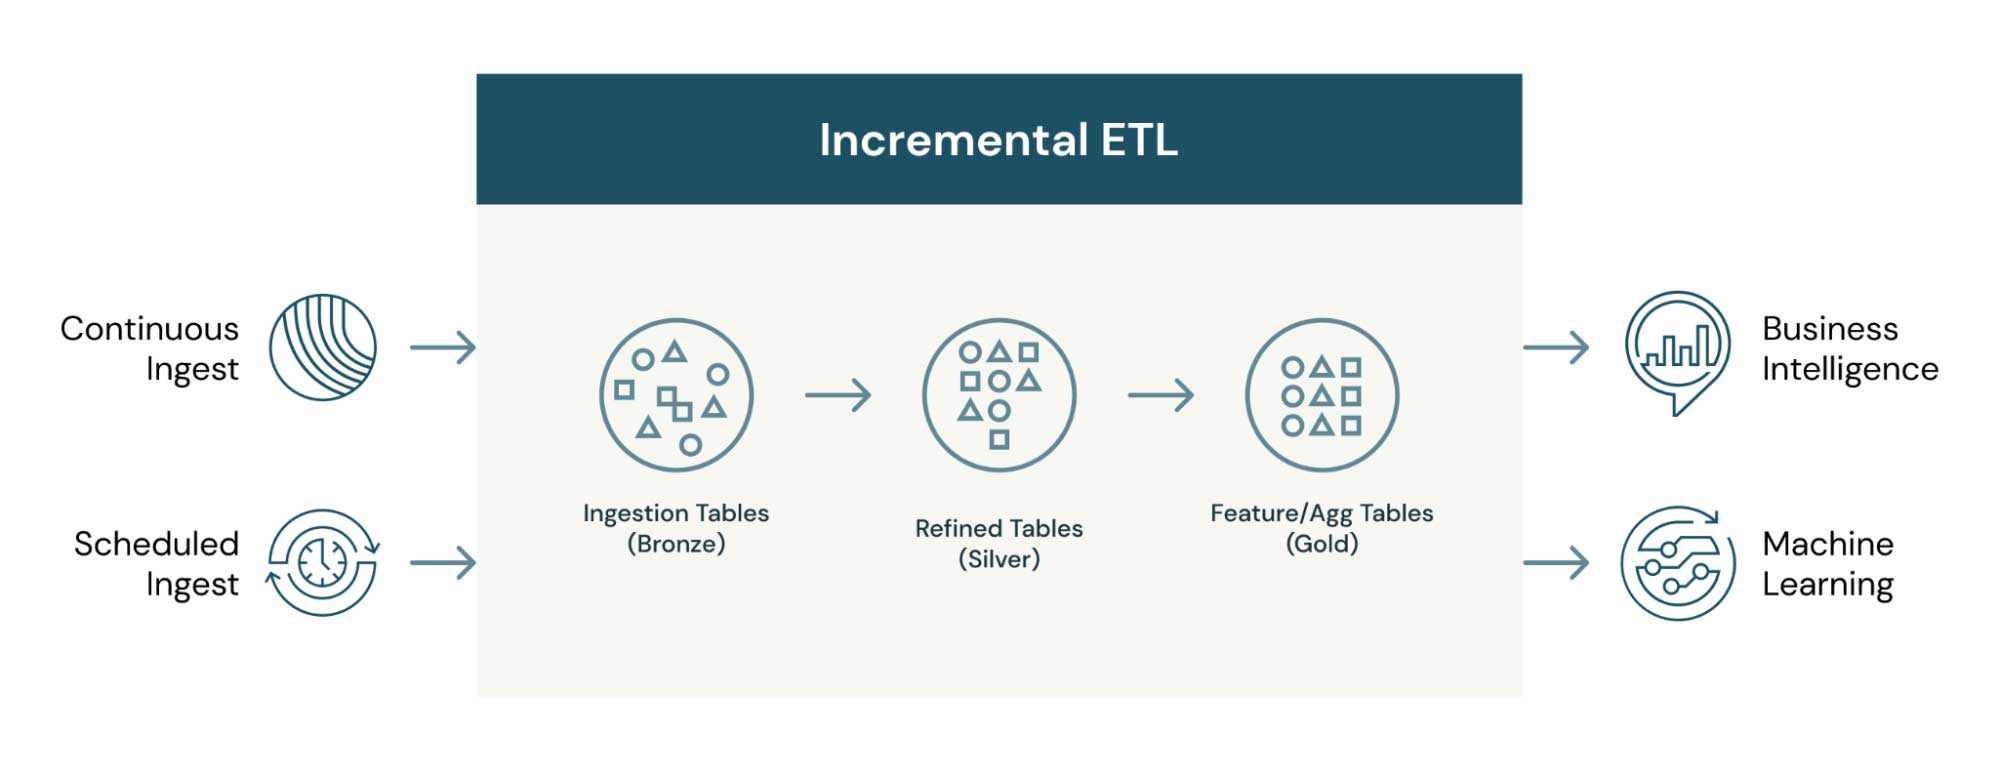 The Databricks incremental ETL process makes the medallion table architecture possible and efficient so that all consumers of data can have the correct curated data sets for their needs.